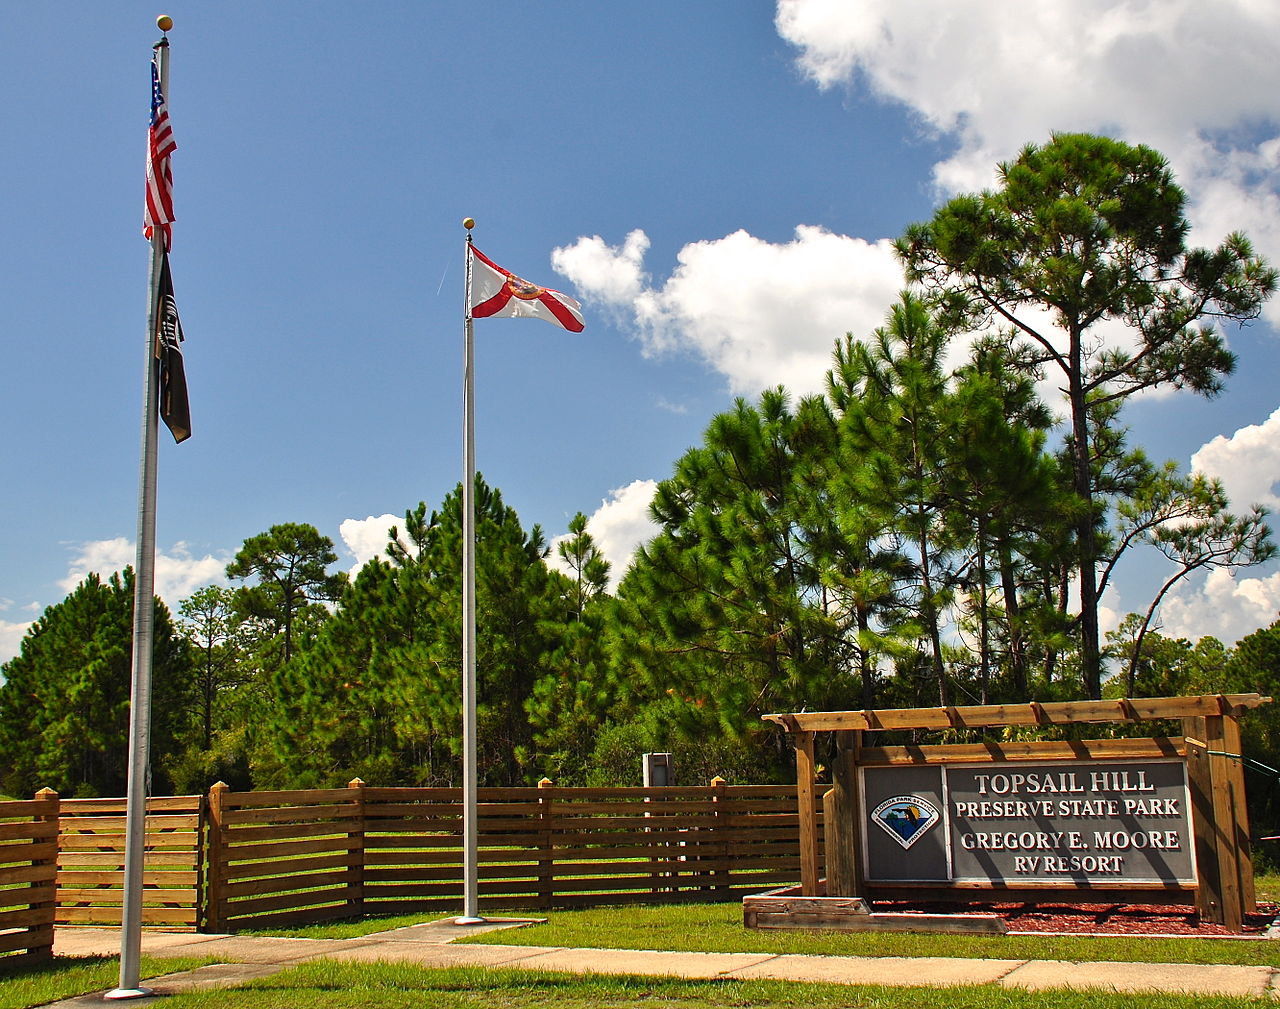 main entrance of Topsail Hill Preserve State Park in Florida